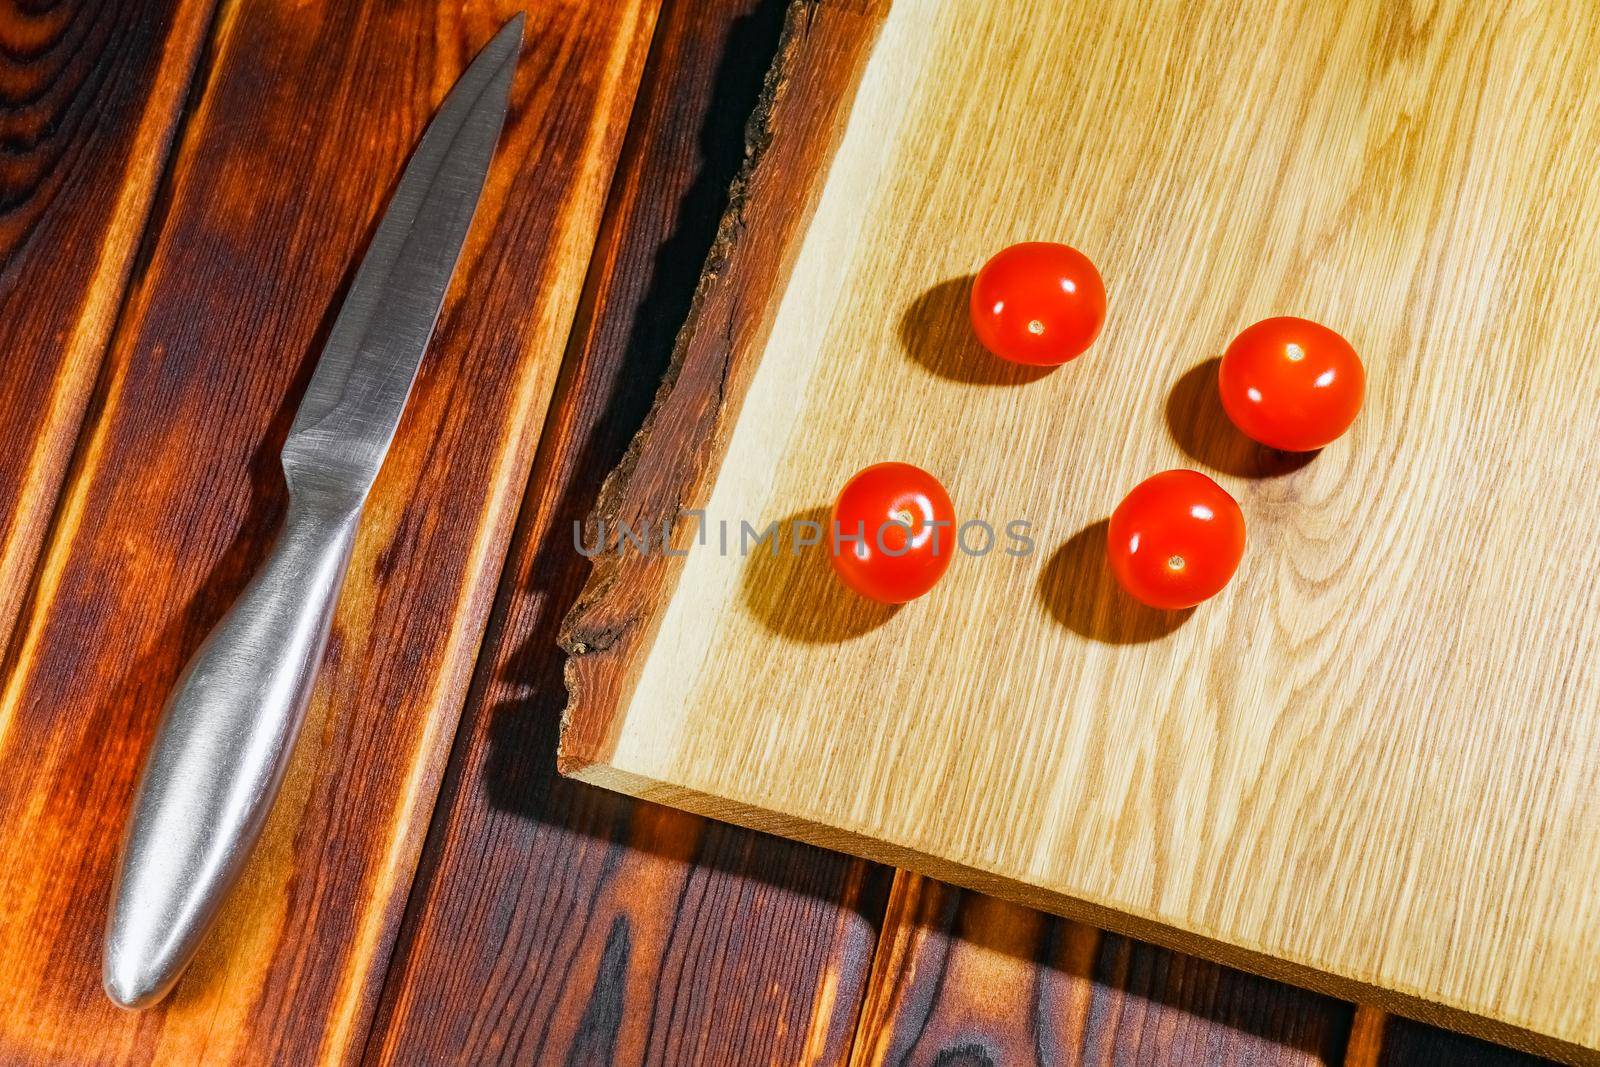 tomato on a chopping Board as background by roman112007